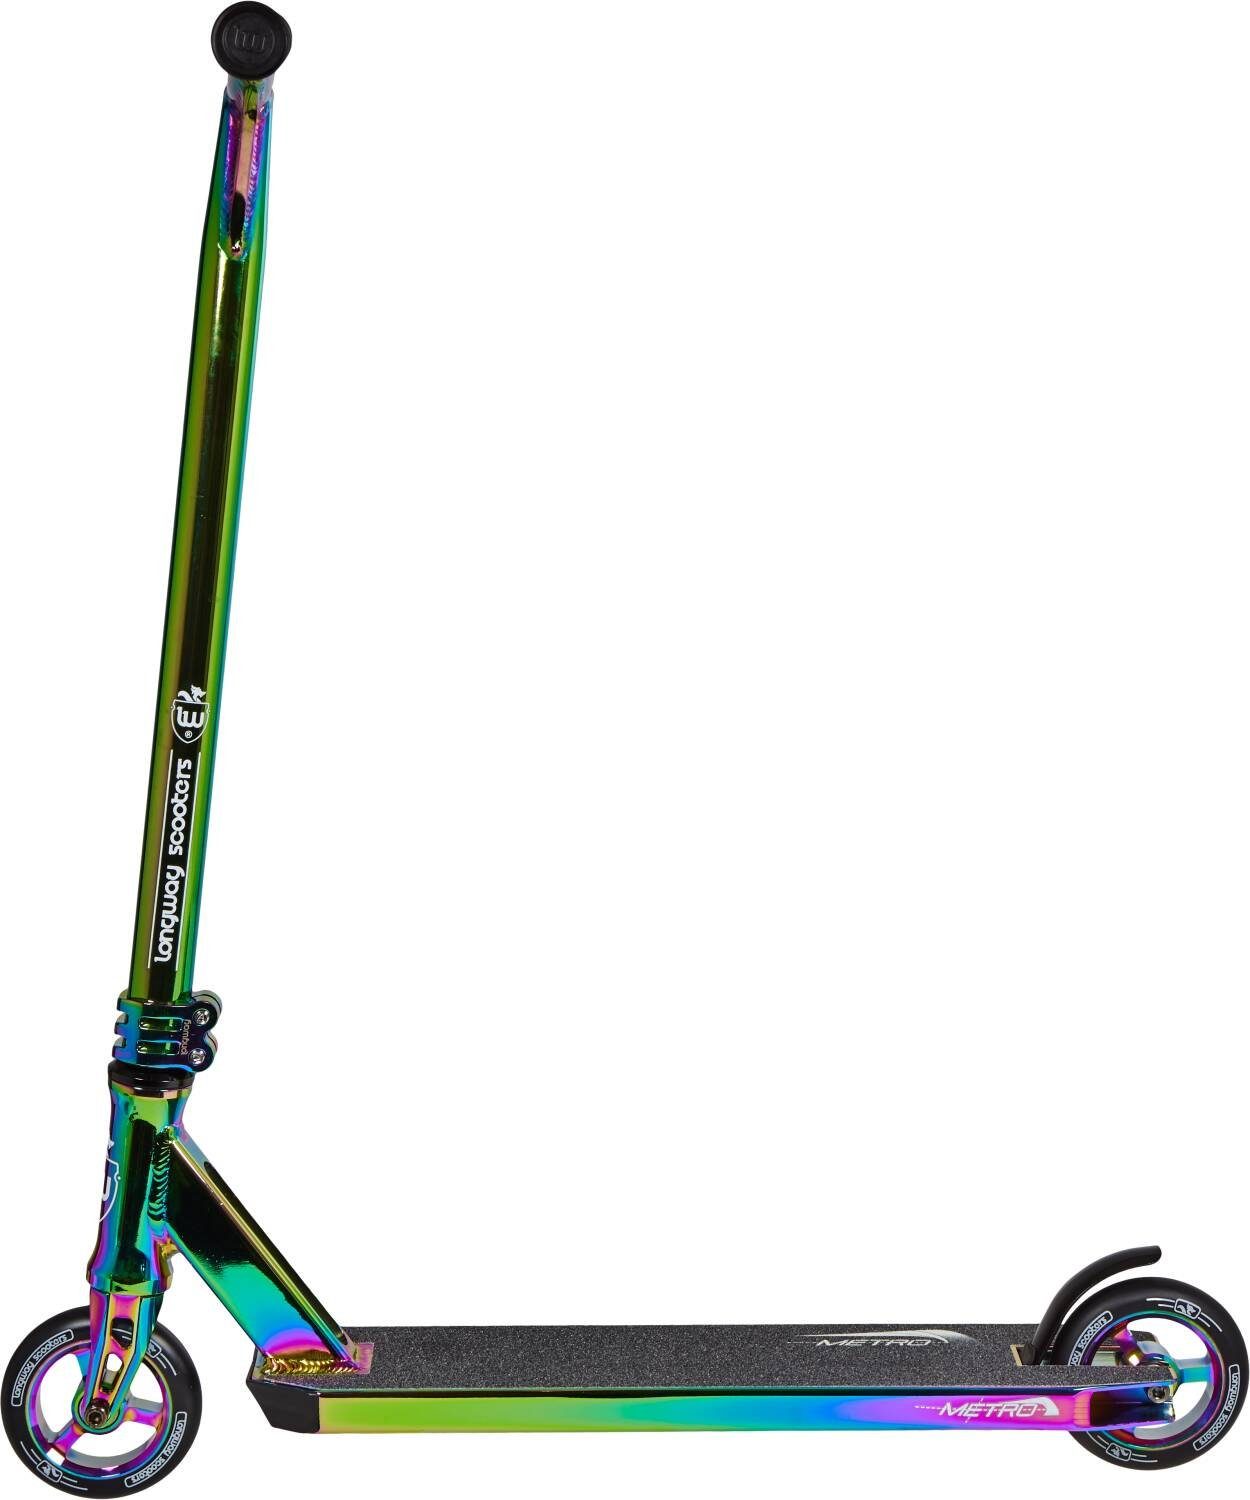 2K19 + Stunt-Scooter Stuntscooter F26 Griptape Longway Neochrome Scooters Full Longway H=79cm Metro